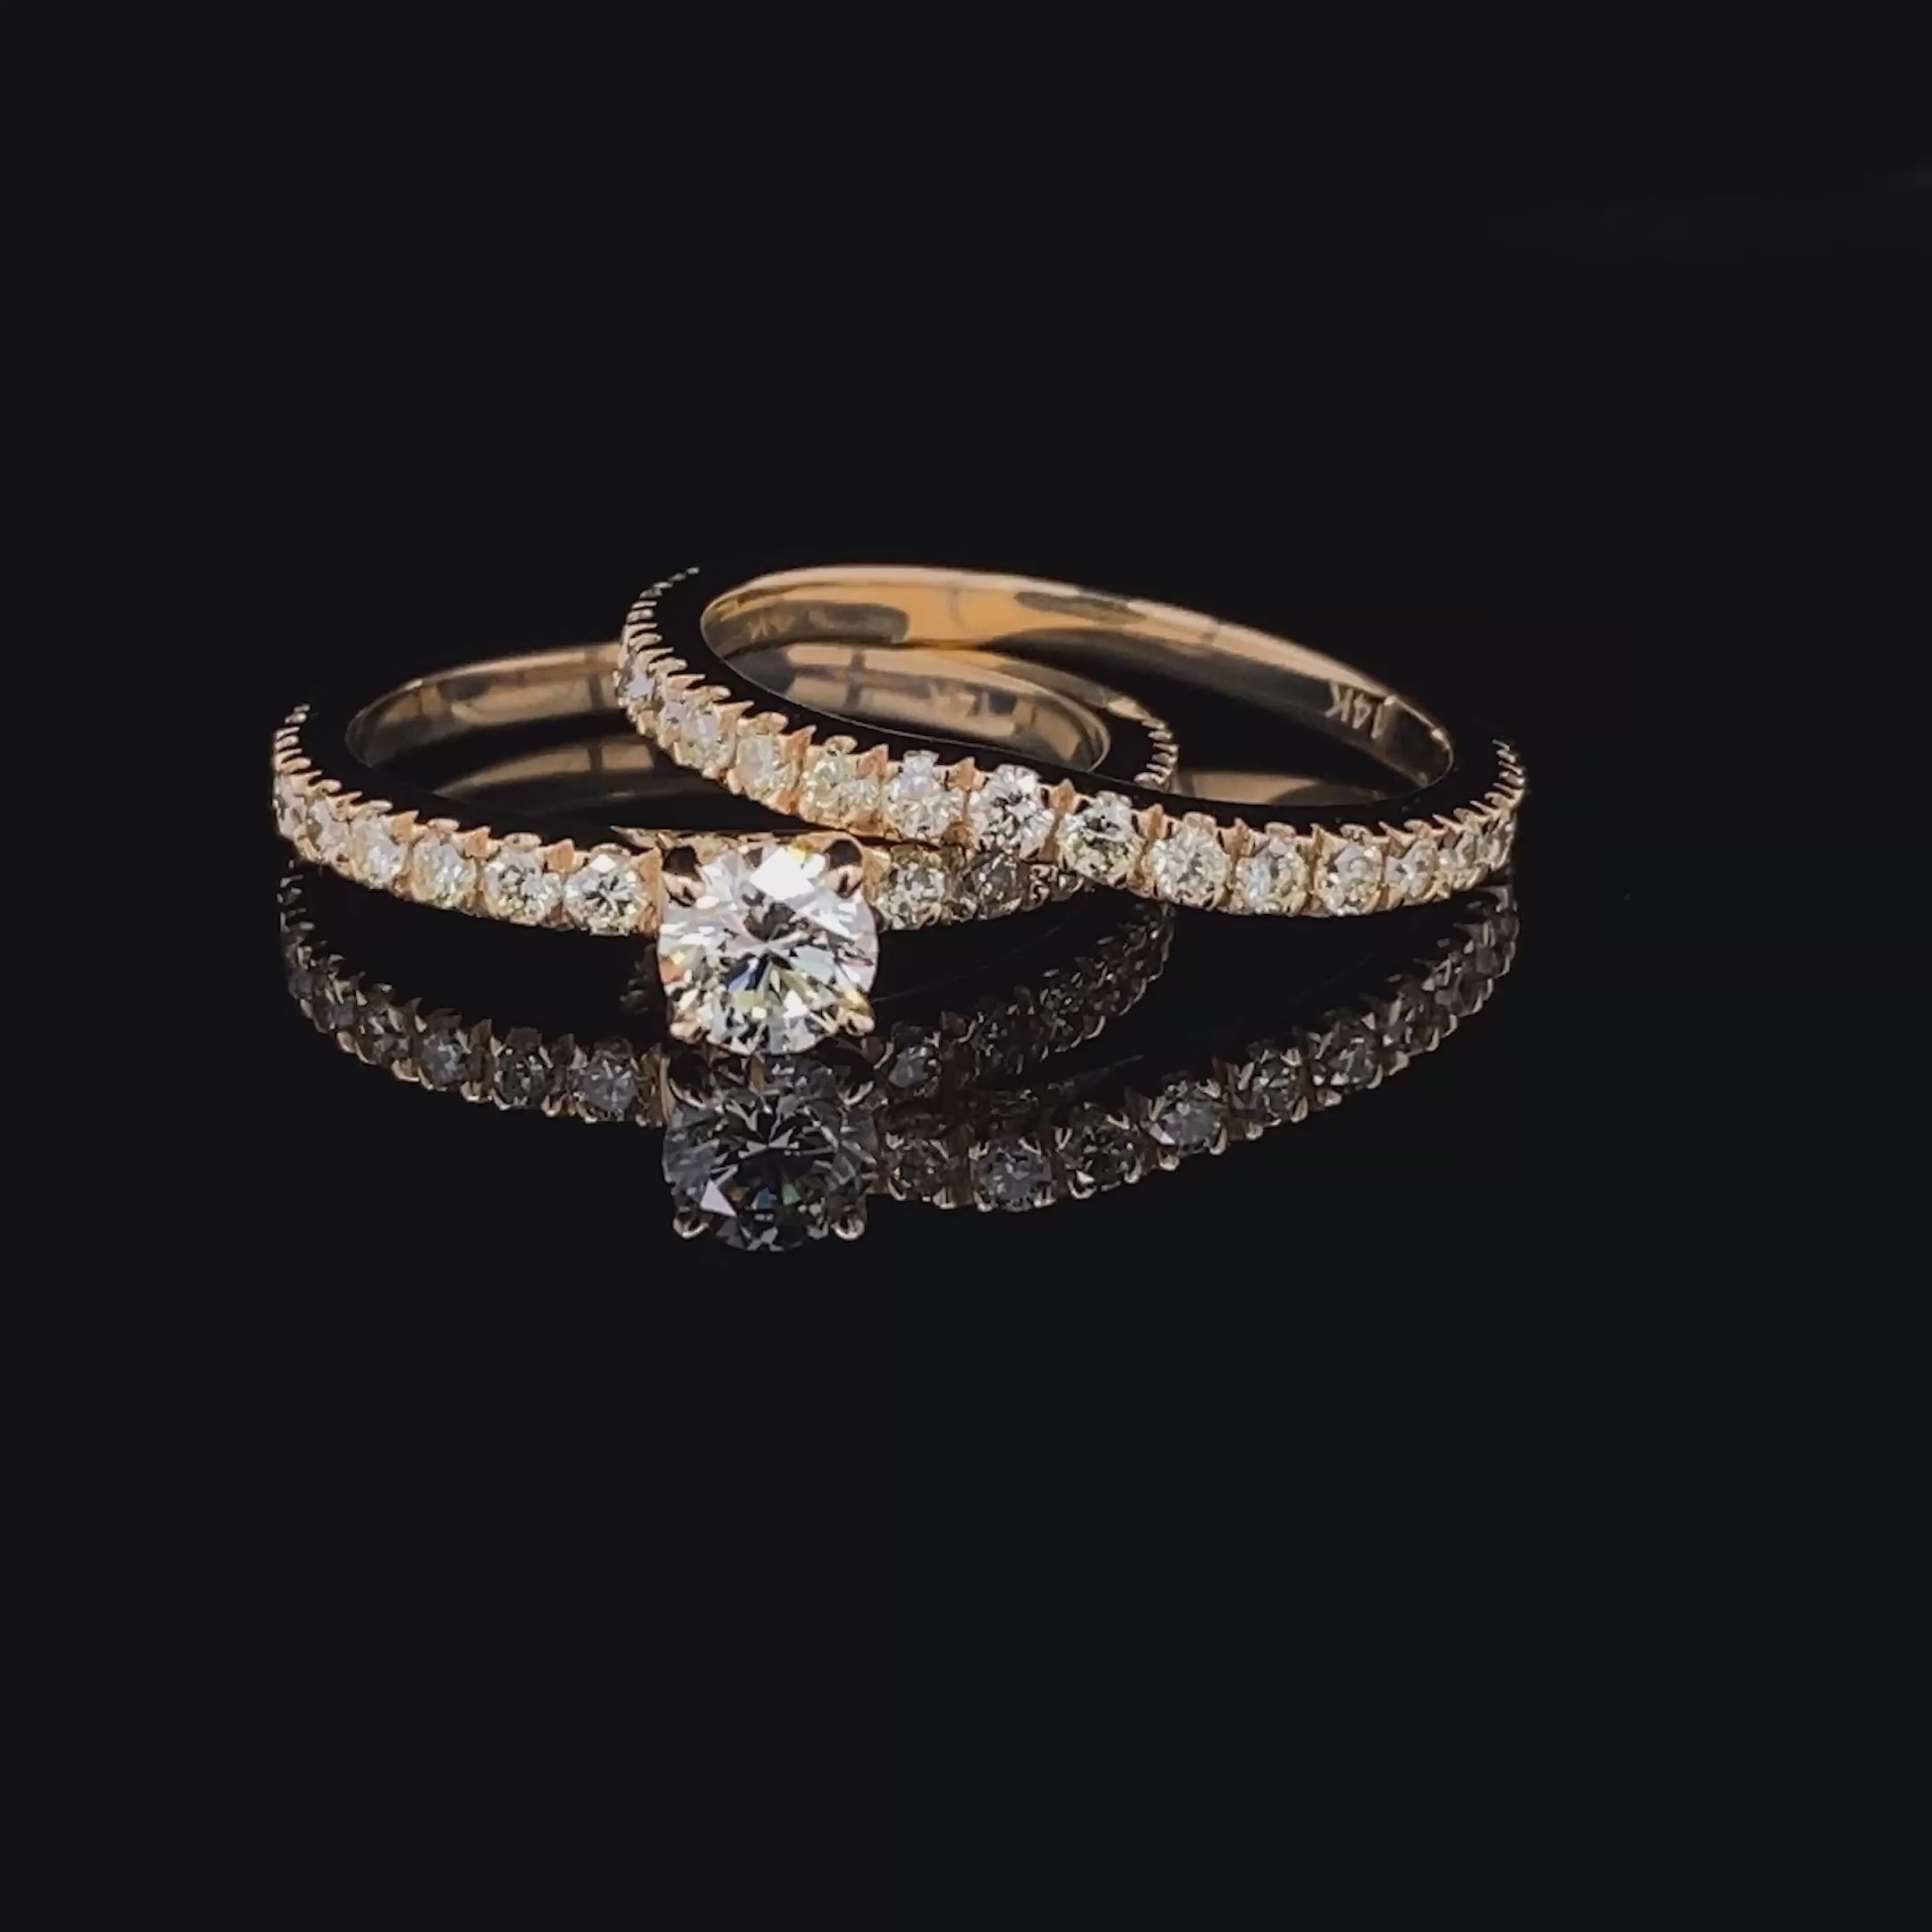 Exquisite 1.20CT Round Cut Diamond Bridal Set in 14KT Yellow Gold